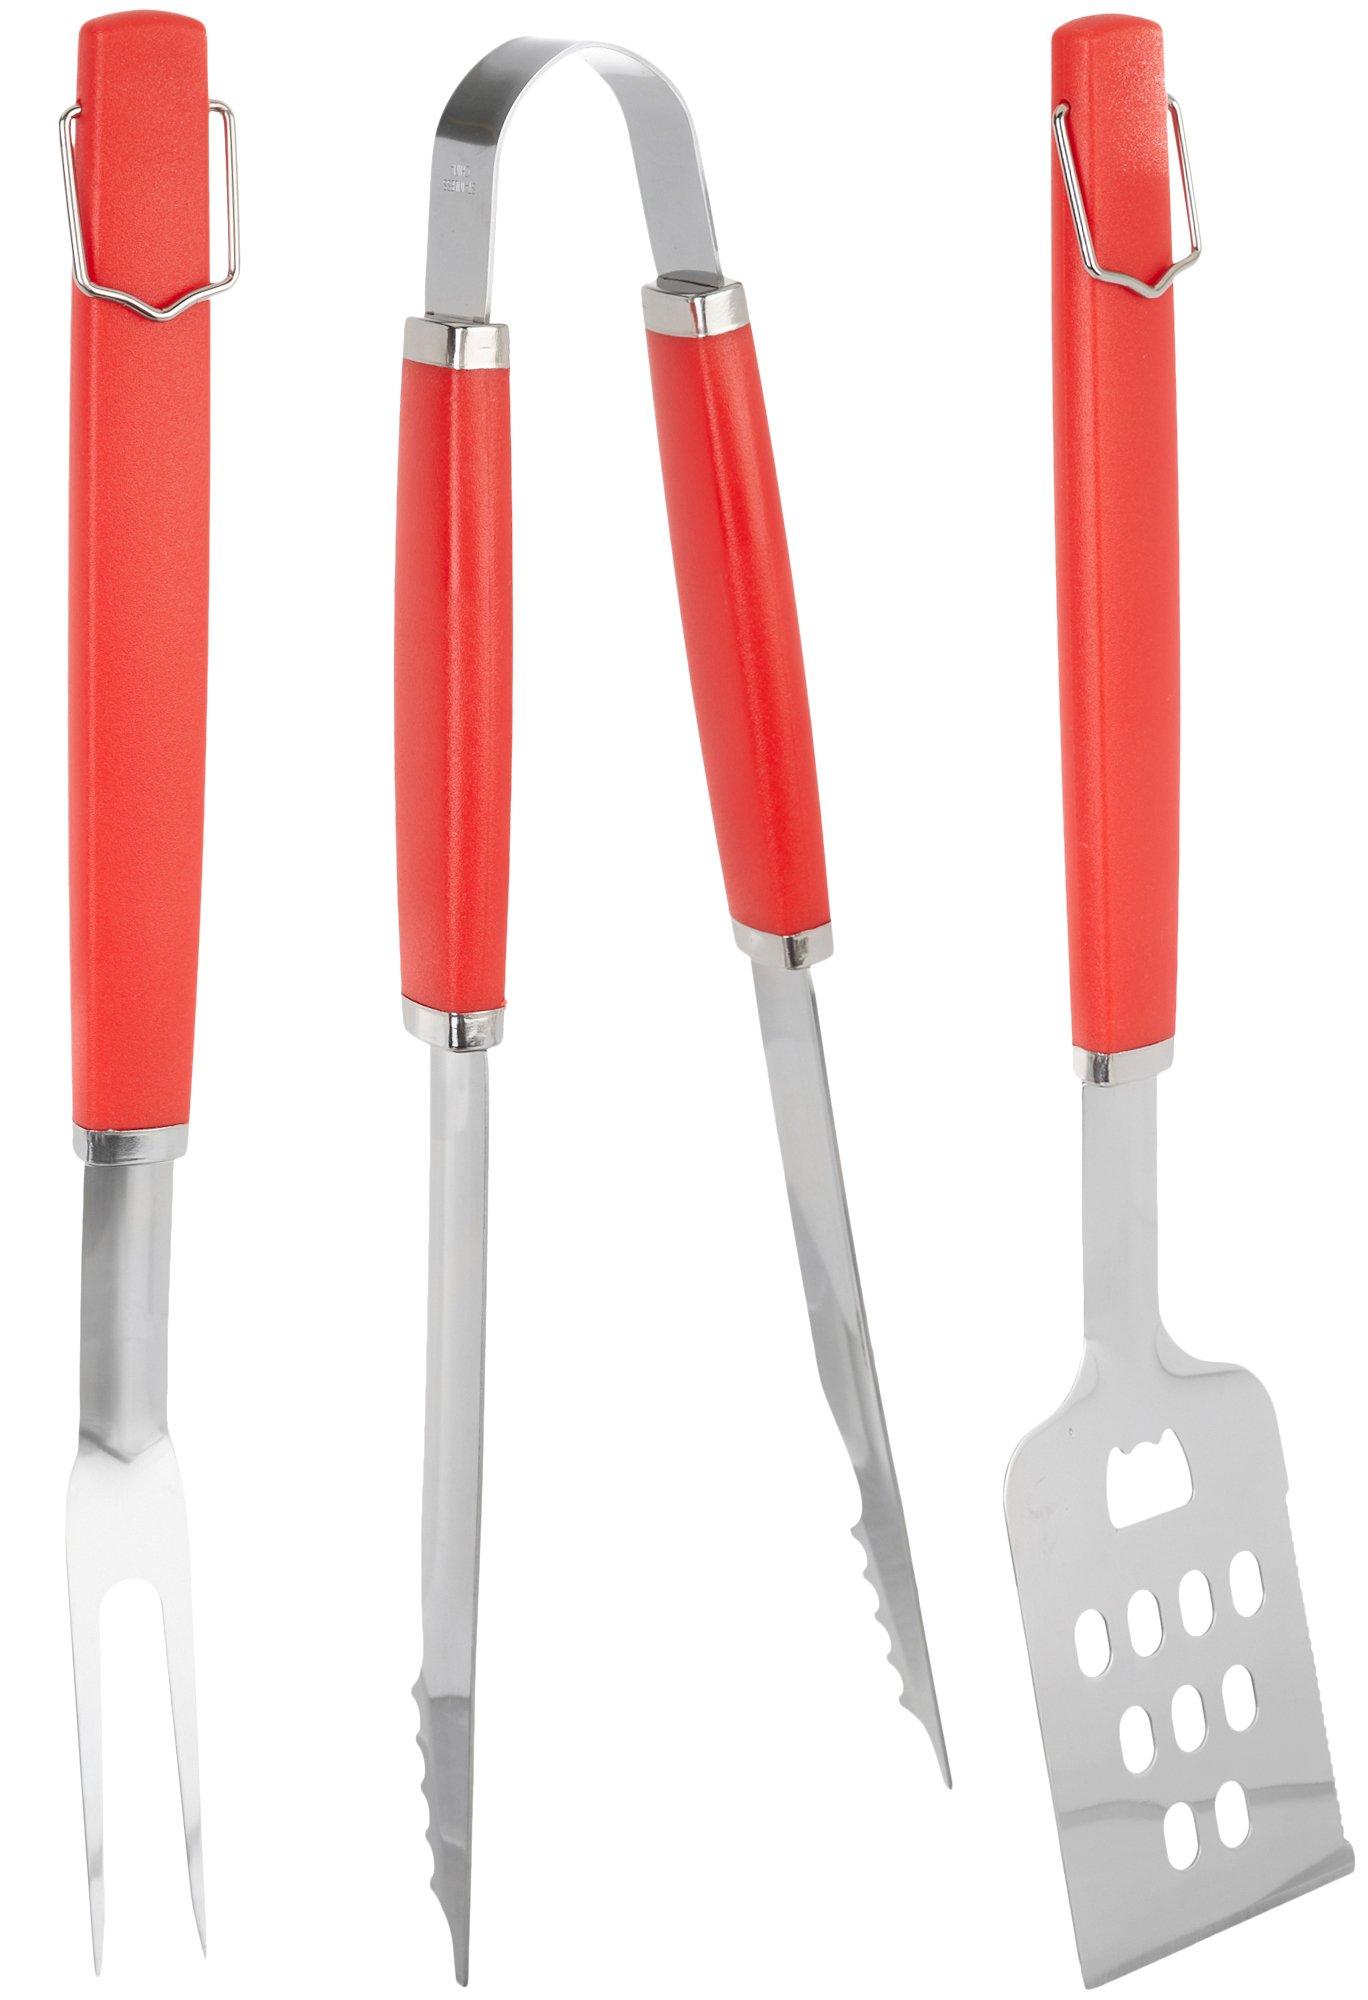 Charcoal Companion 3-pc. Barbeque Tool Set